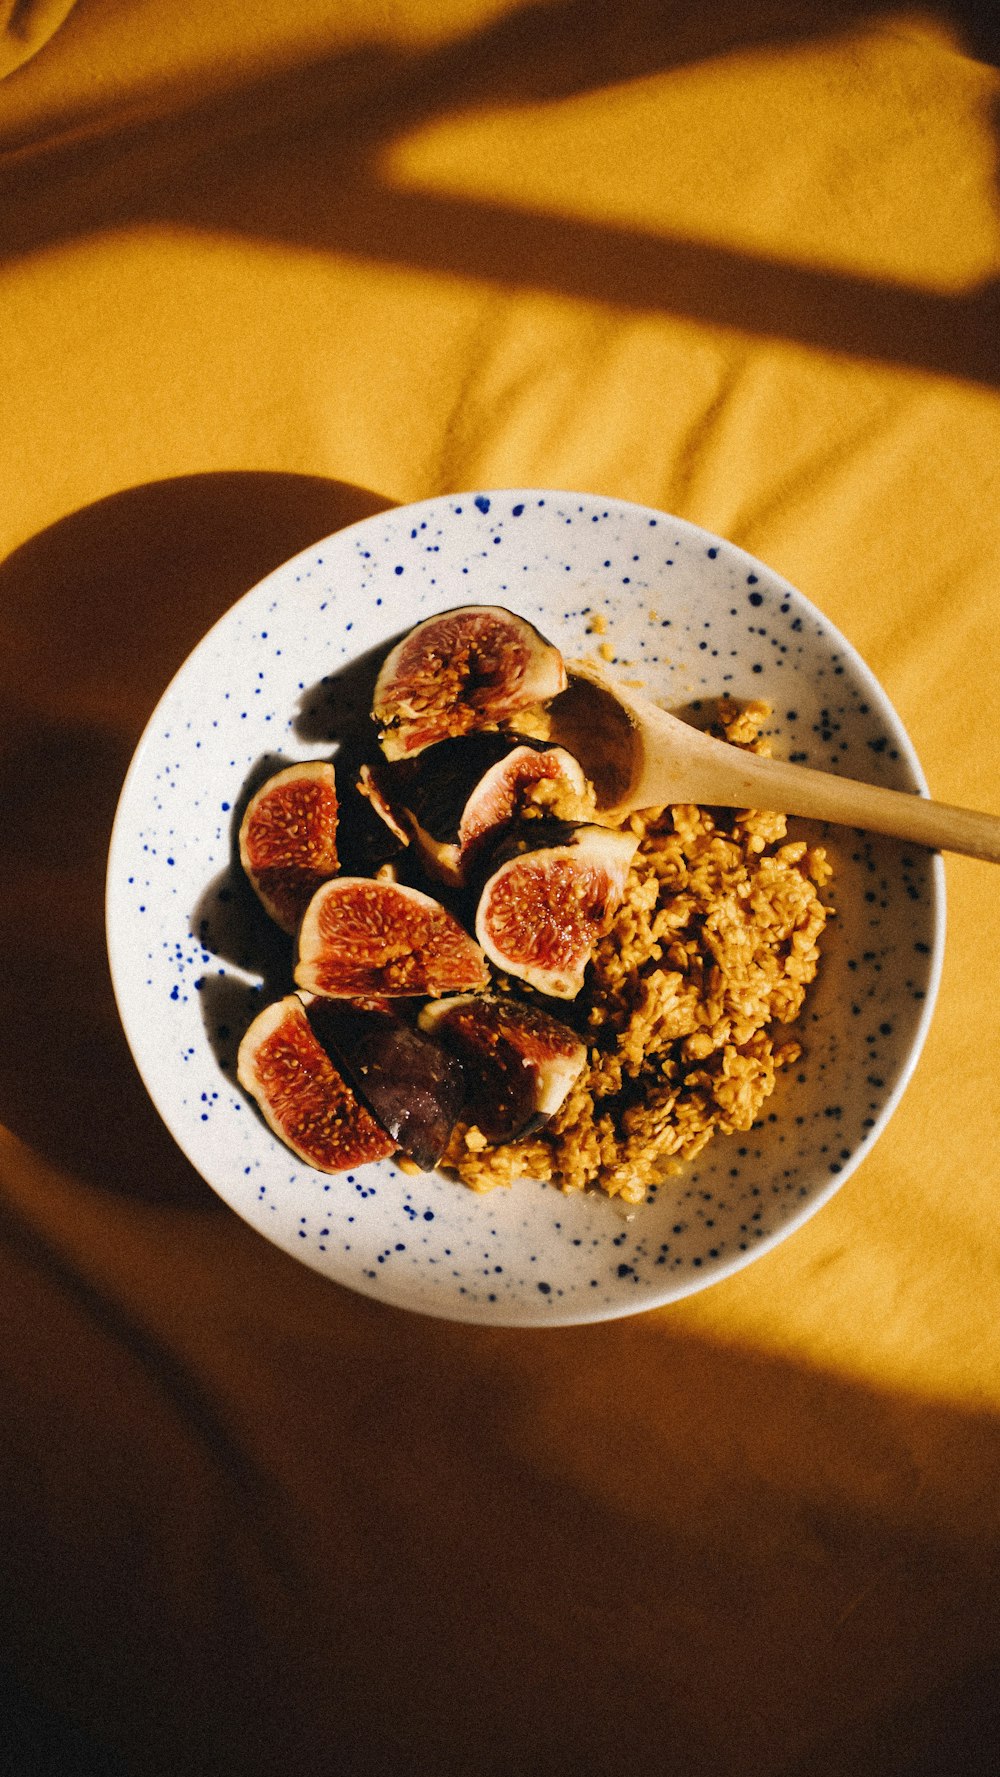 a bowl of cereal and figs on a table